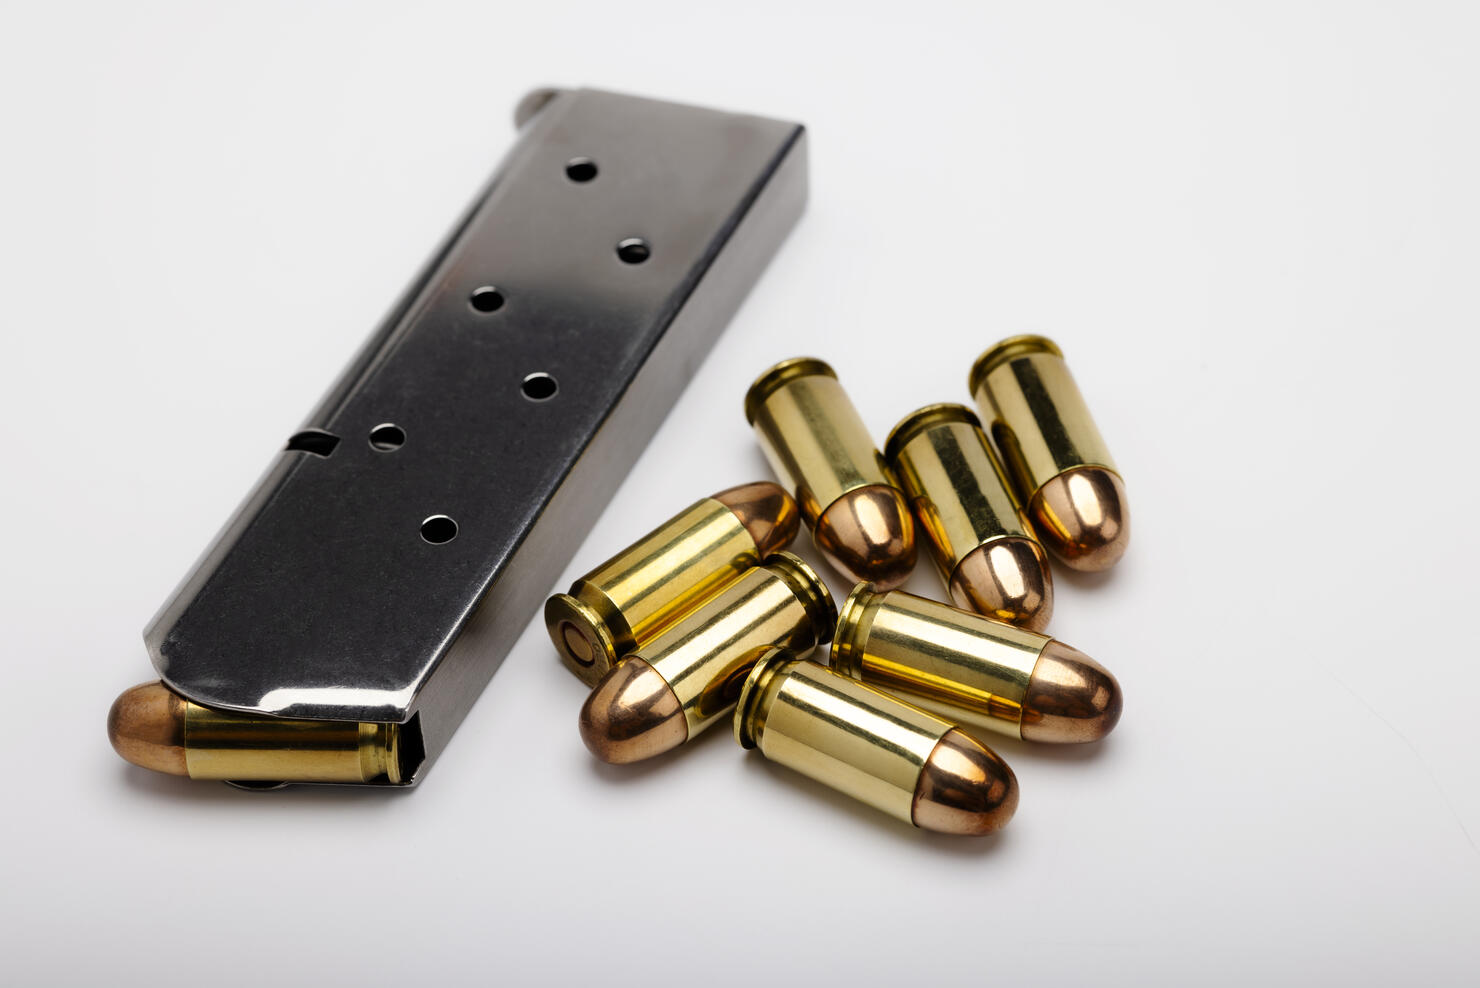 .45 ACP bullets with gun magazine on white background